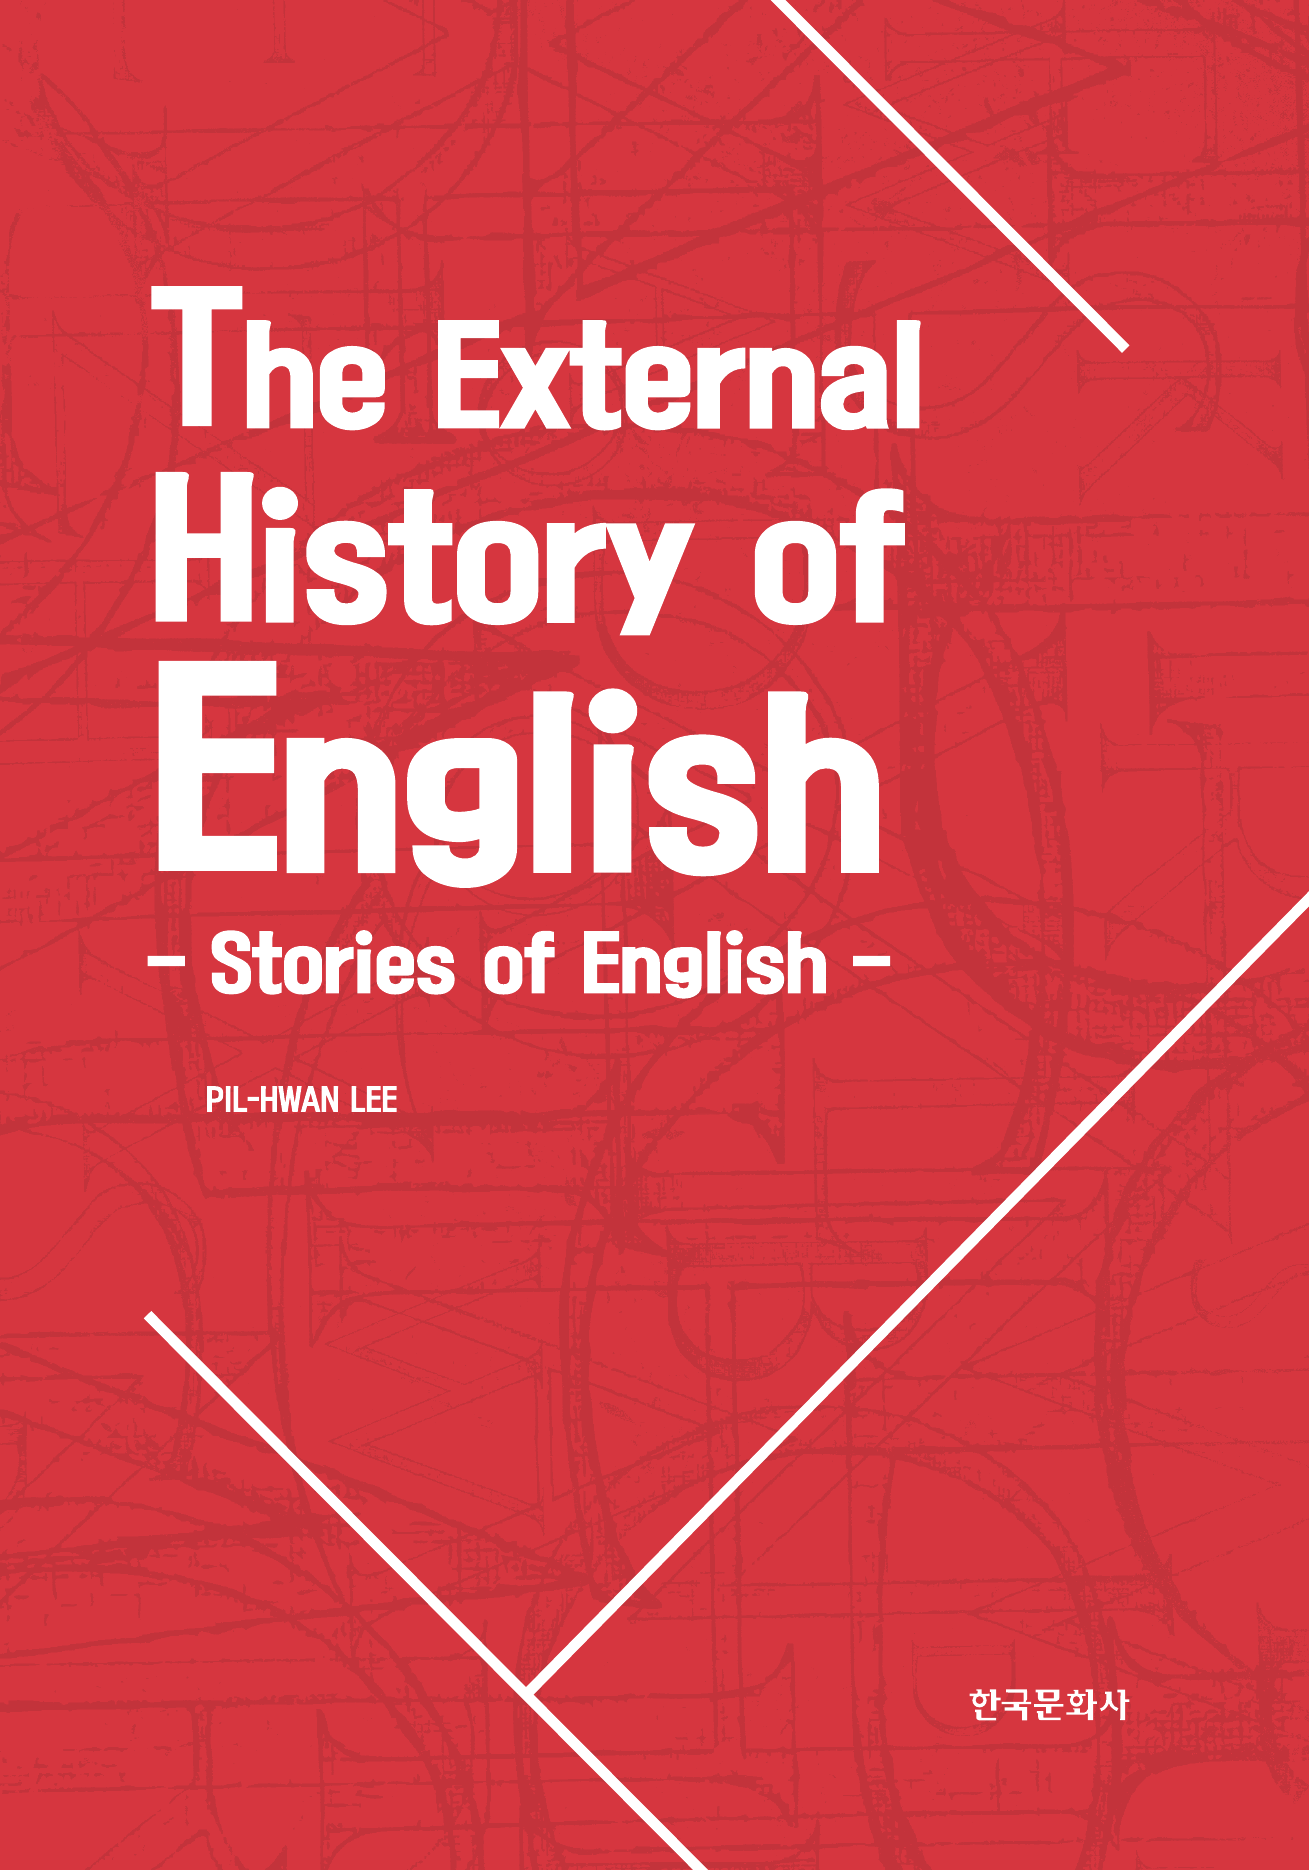 The External History of English: Stories of English